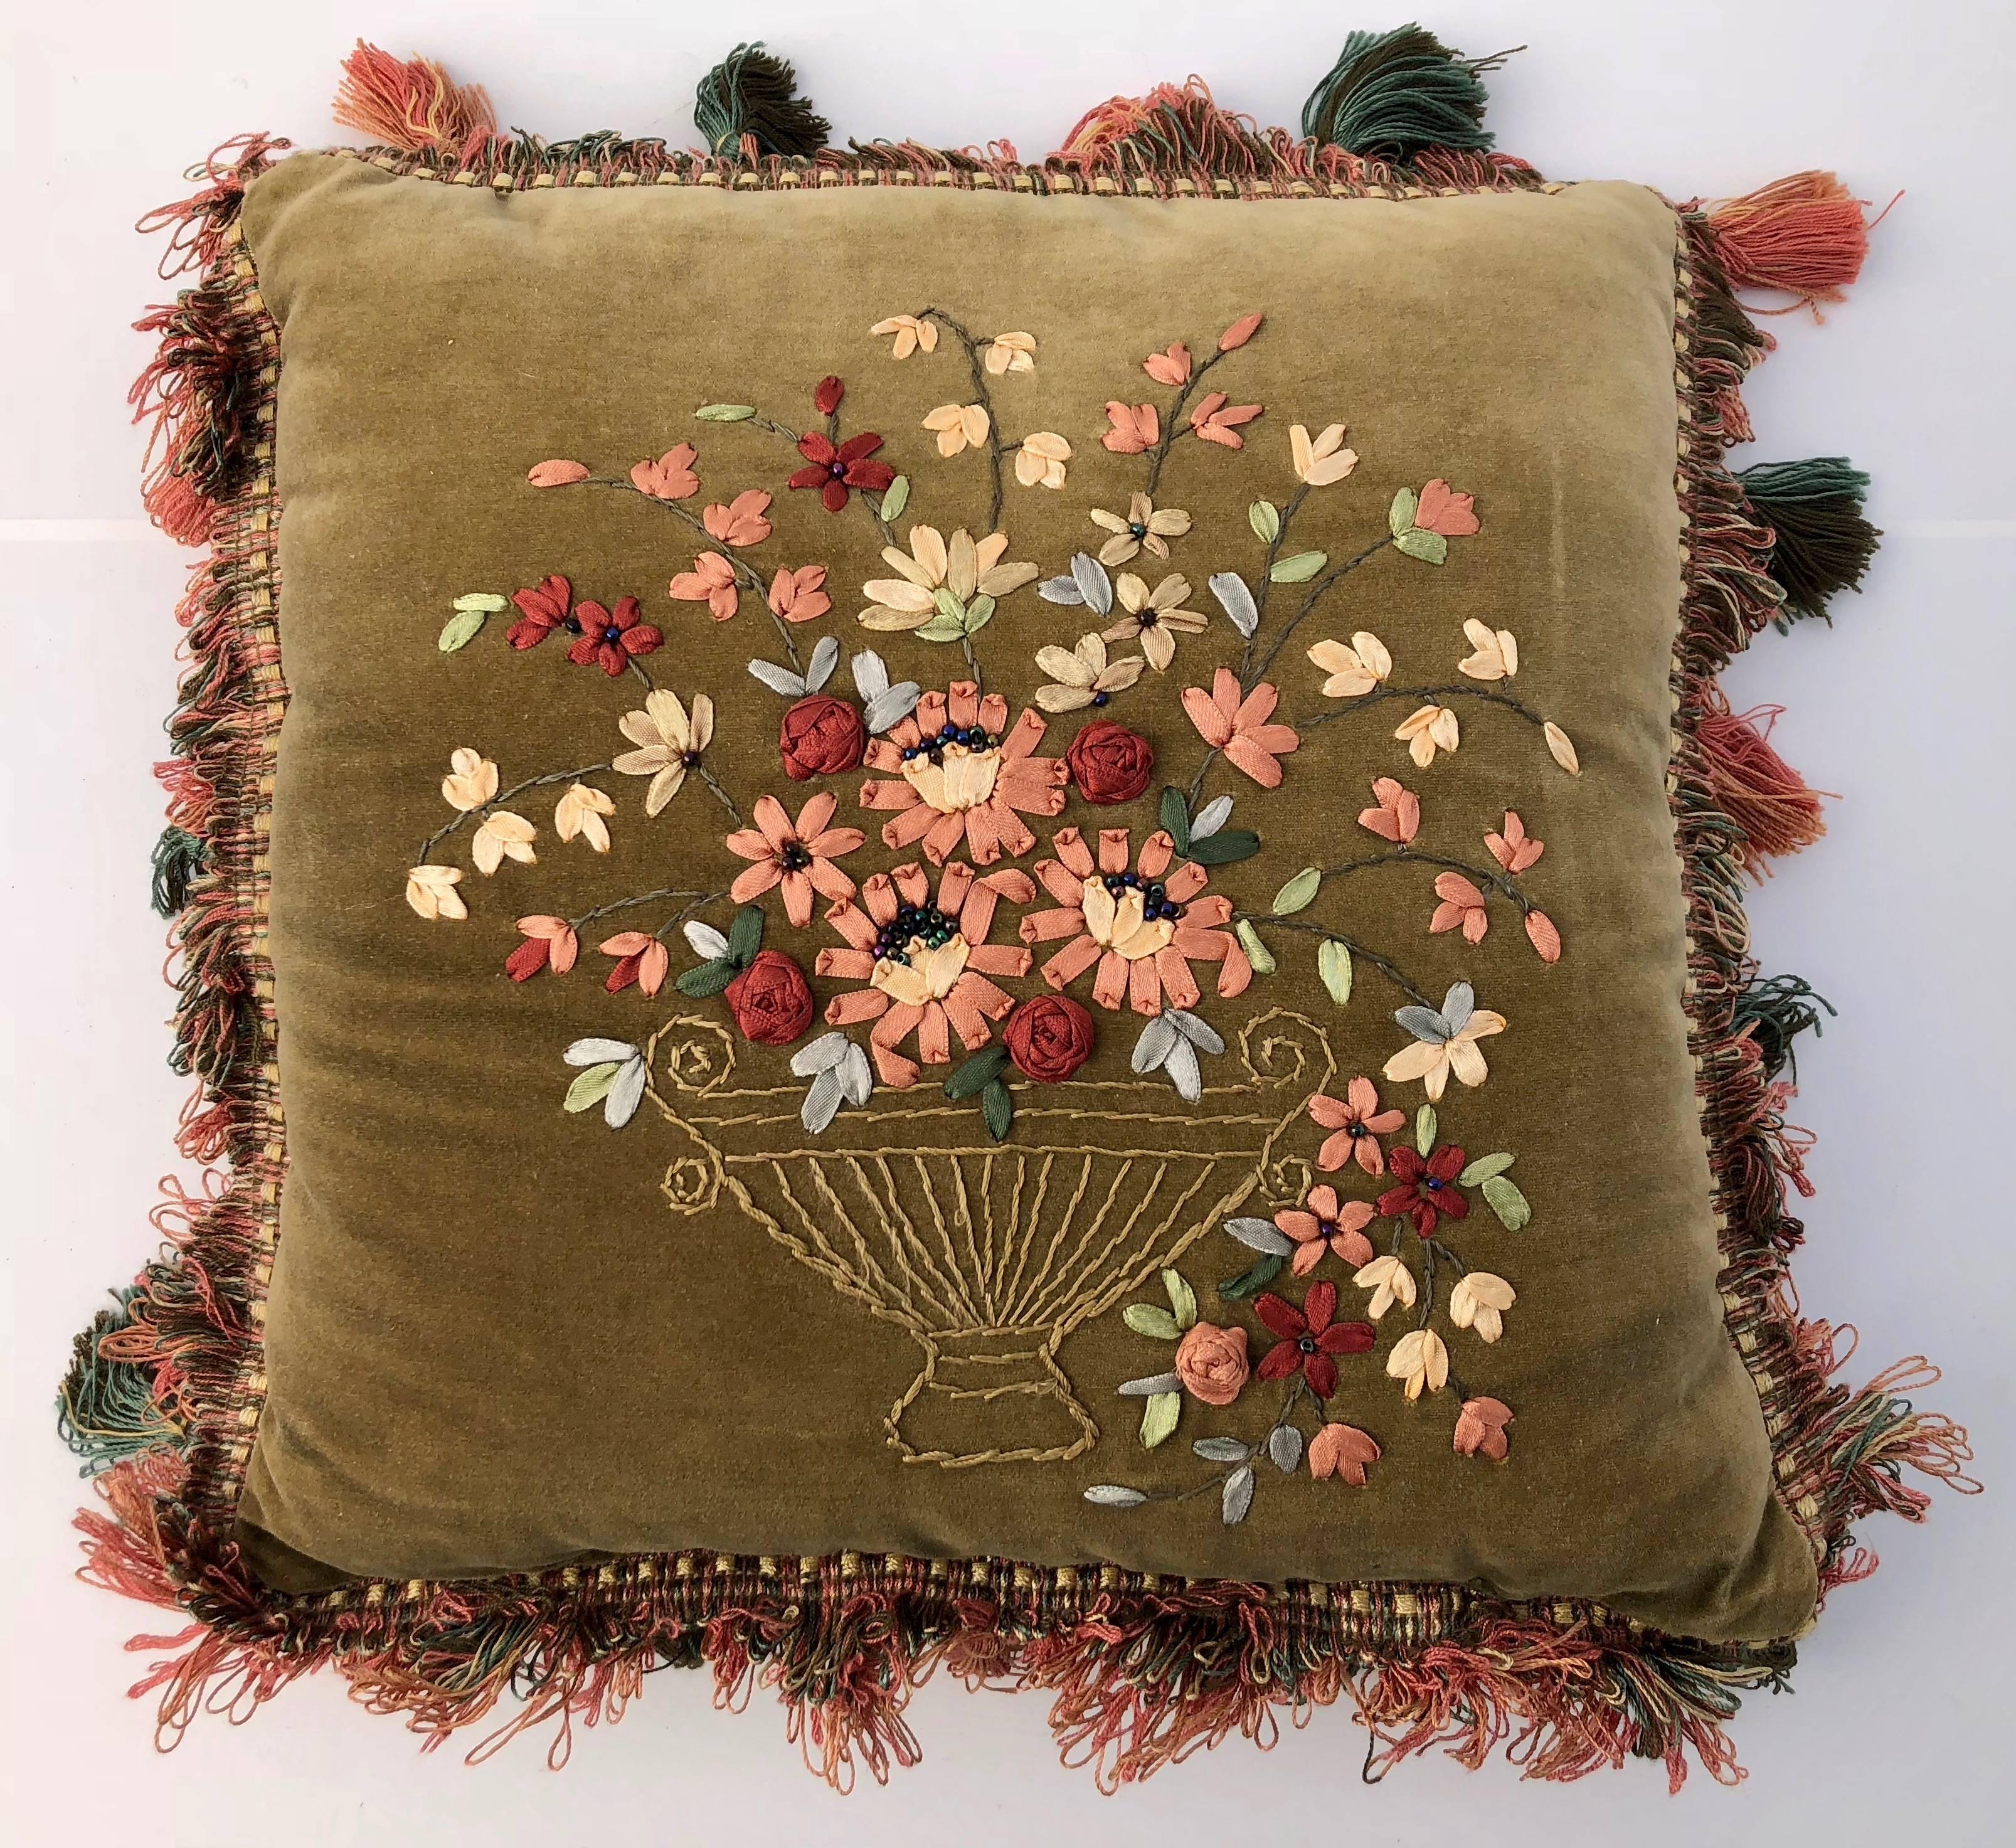 All of these beautiful ribbon art pillows are in velvet. They are in a variety of designs and colors that blend well together. Four of the pillows have tassels on their borders and all are finished with decorative trim. Their colors are lovely and